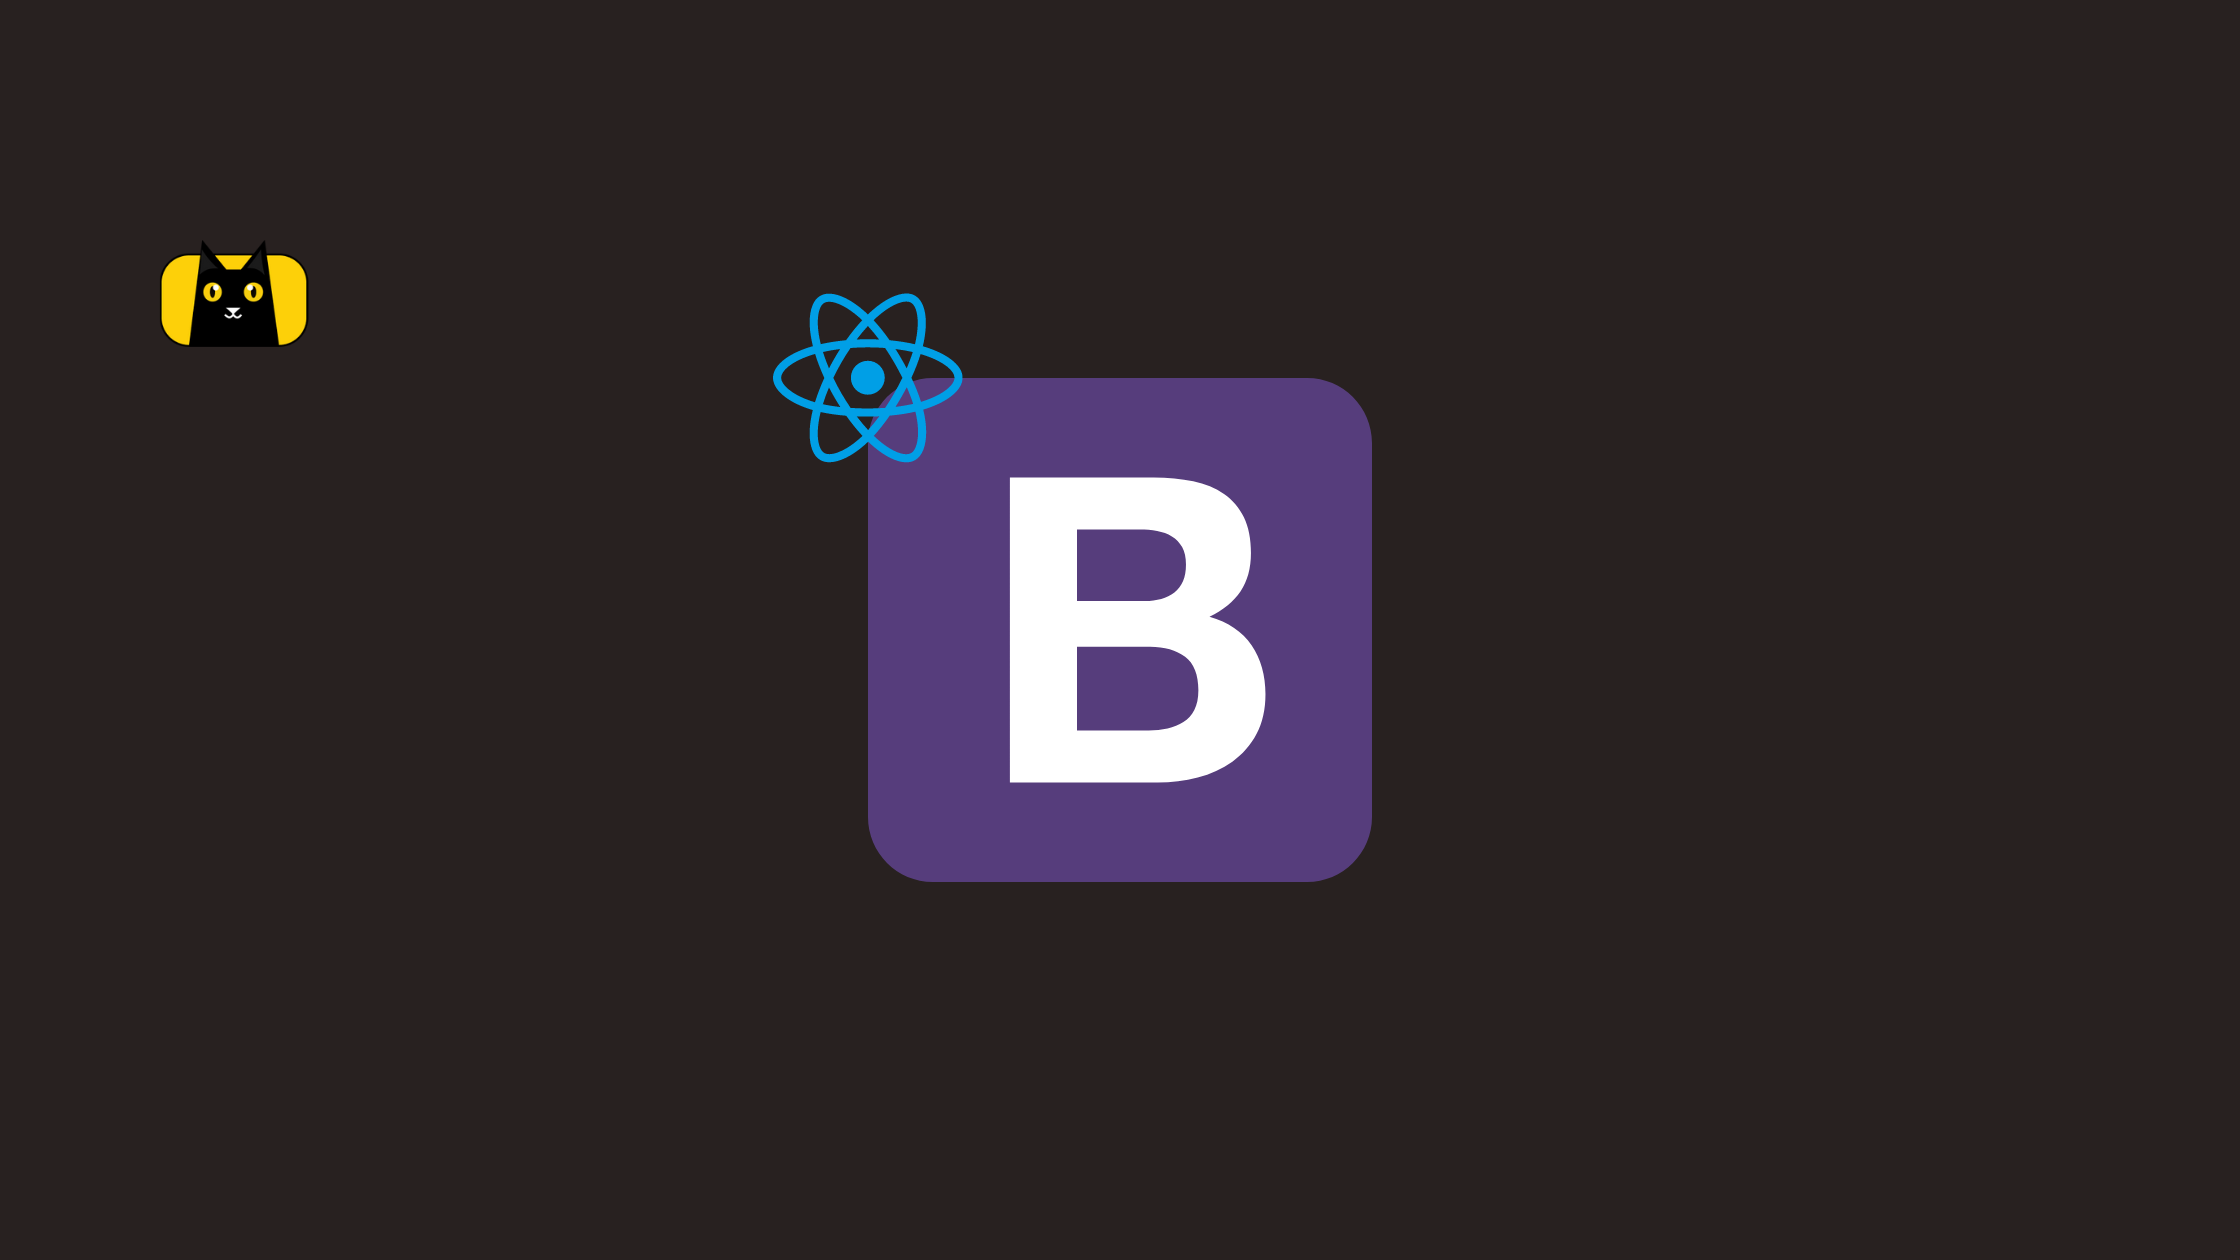 A picture of a square button with a B , a React logo, and a CopyCat logo.